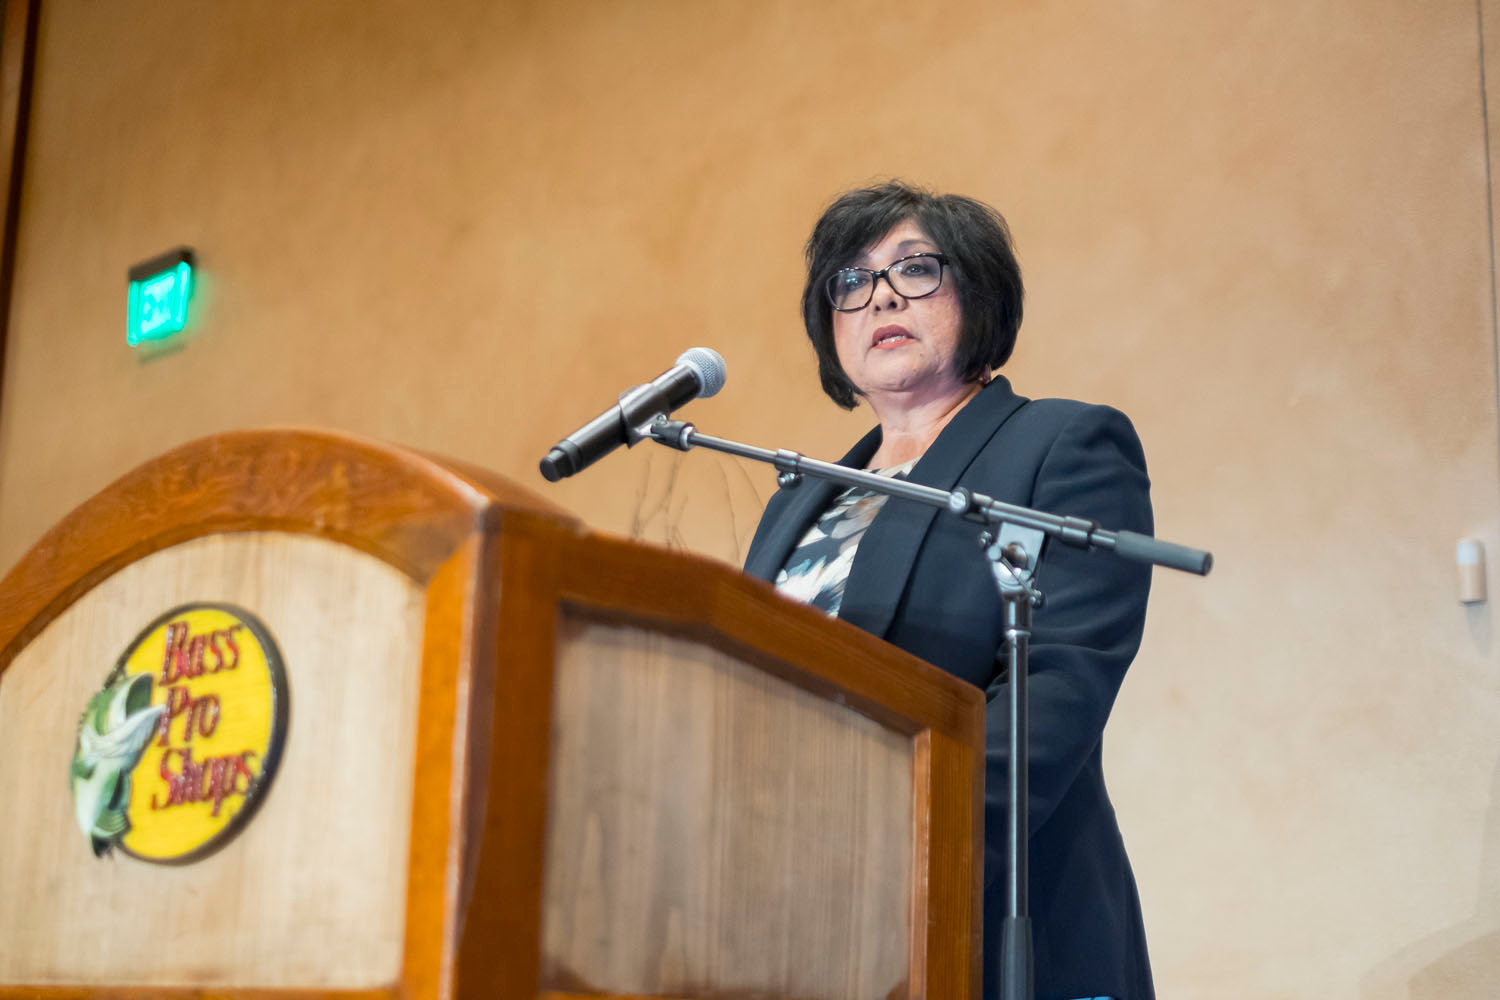 Mary Ann Rojas, the city’s former director of Workforce Development, speaks at a workforce conference in 2018.